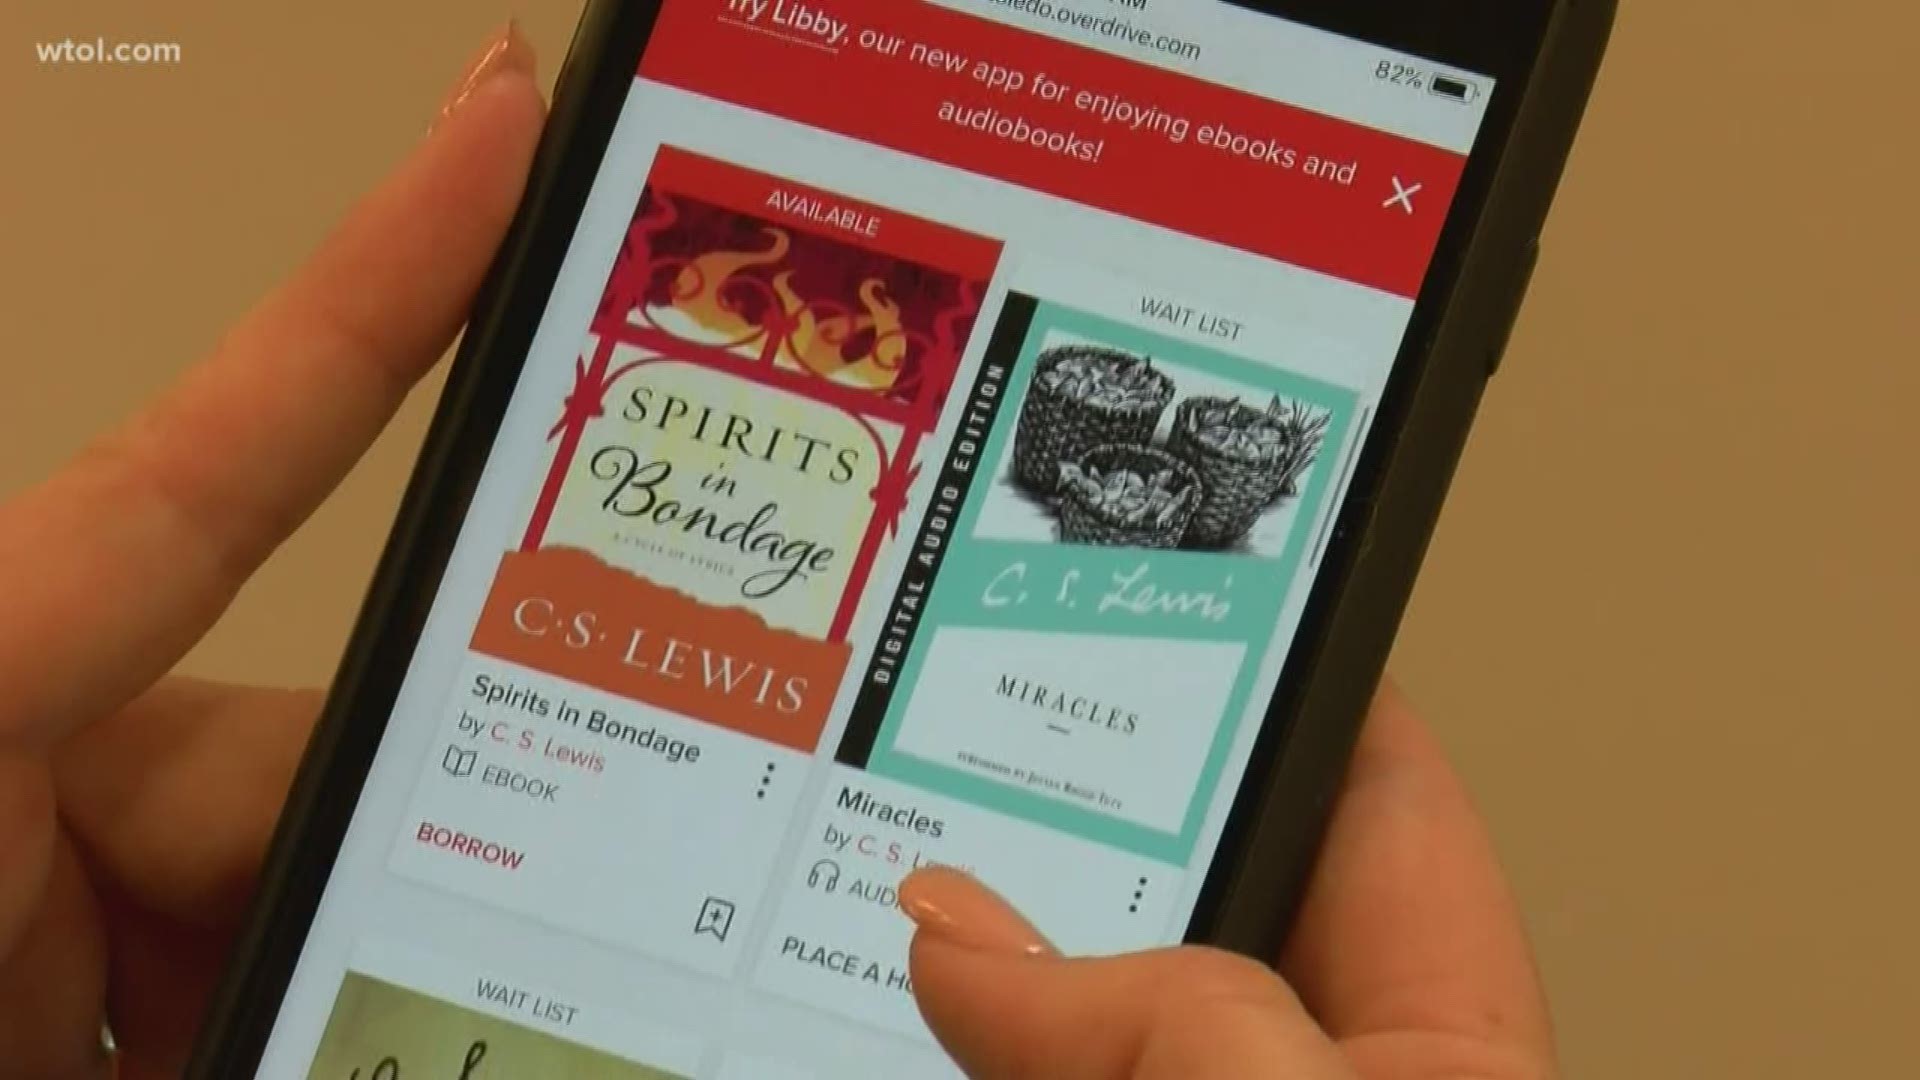 The announcement from MacMillan says they will allow only one person to borrow a newly released e-book per library for the first two months of its publication.